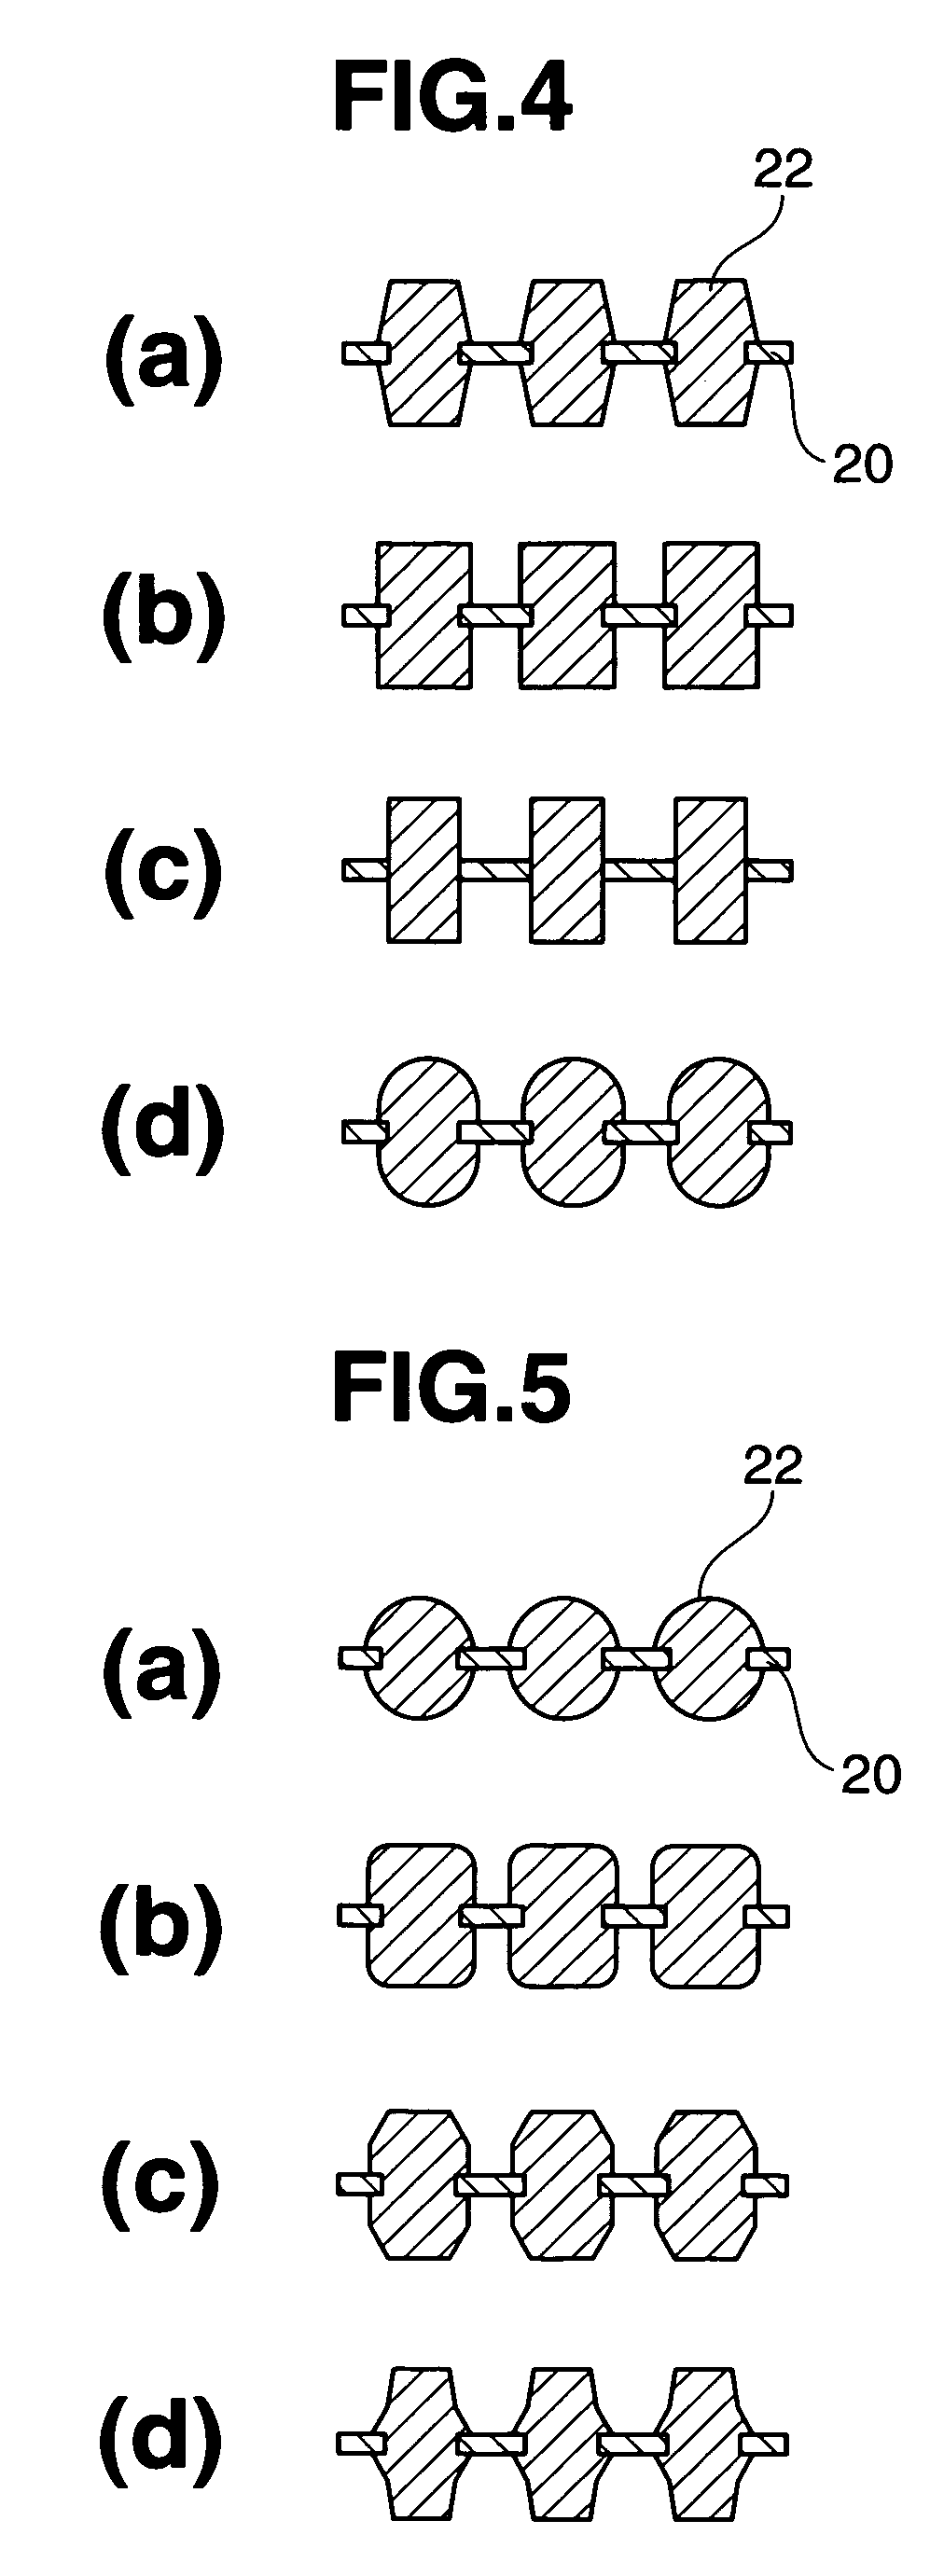 Conductive contact elements and electric connectors